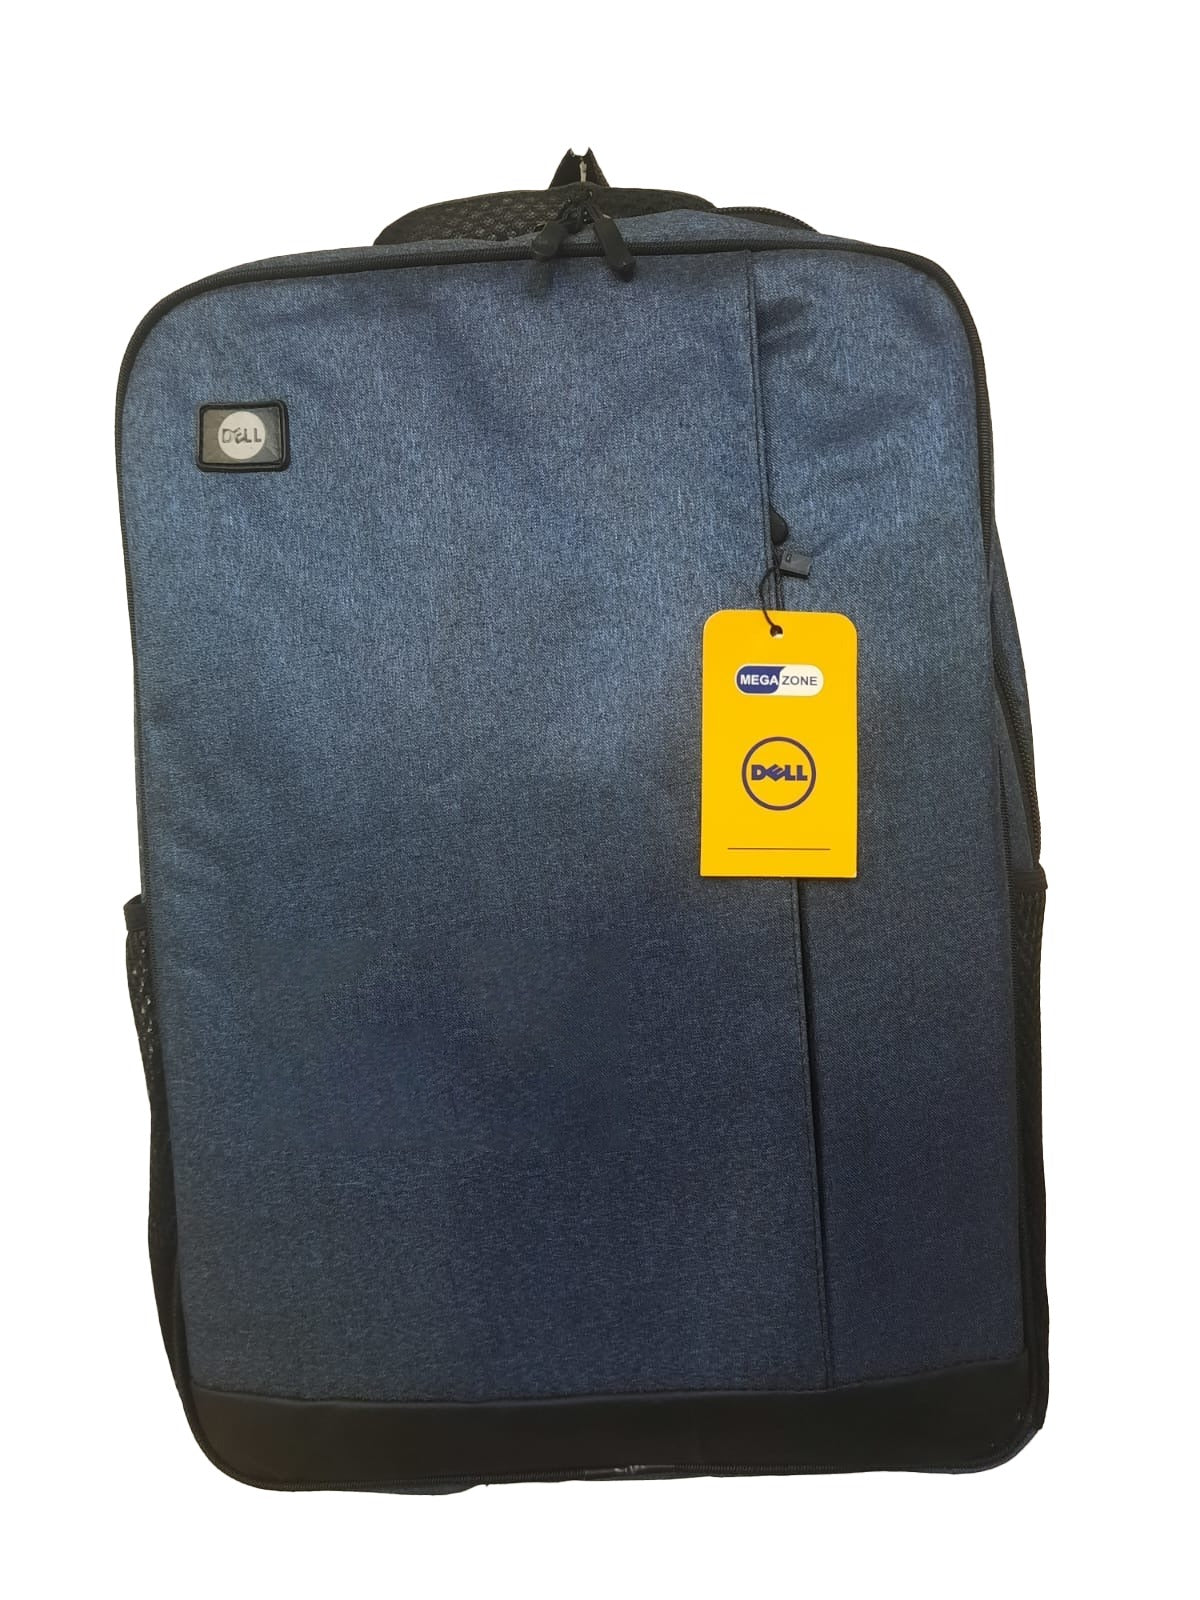 DELL 15.6 inch Laptop Bag pack with Full padded & 2 ZIP In Parachute Fabric Black/Blue